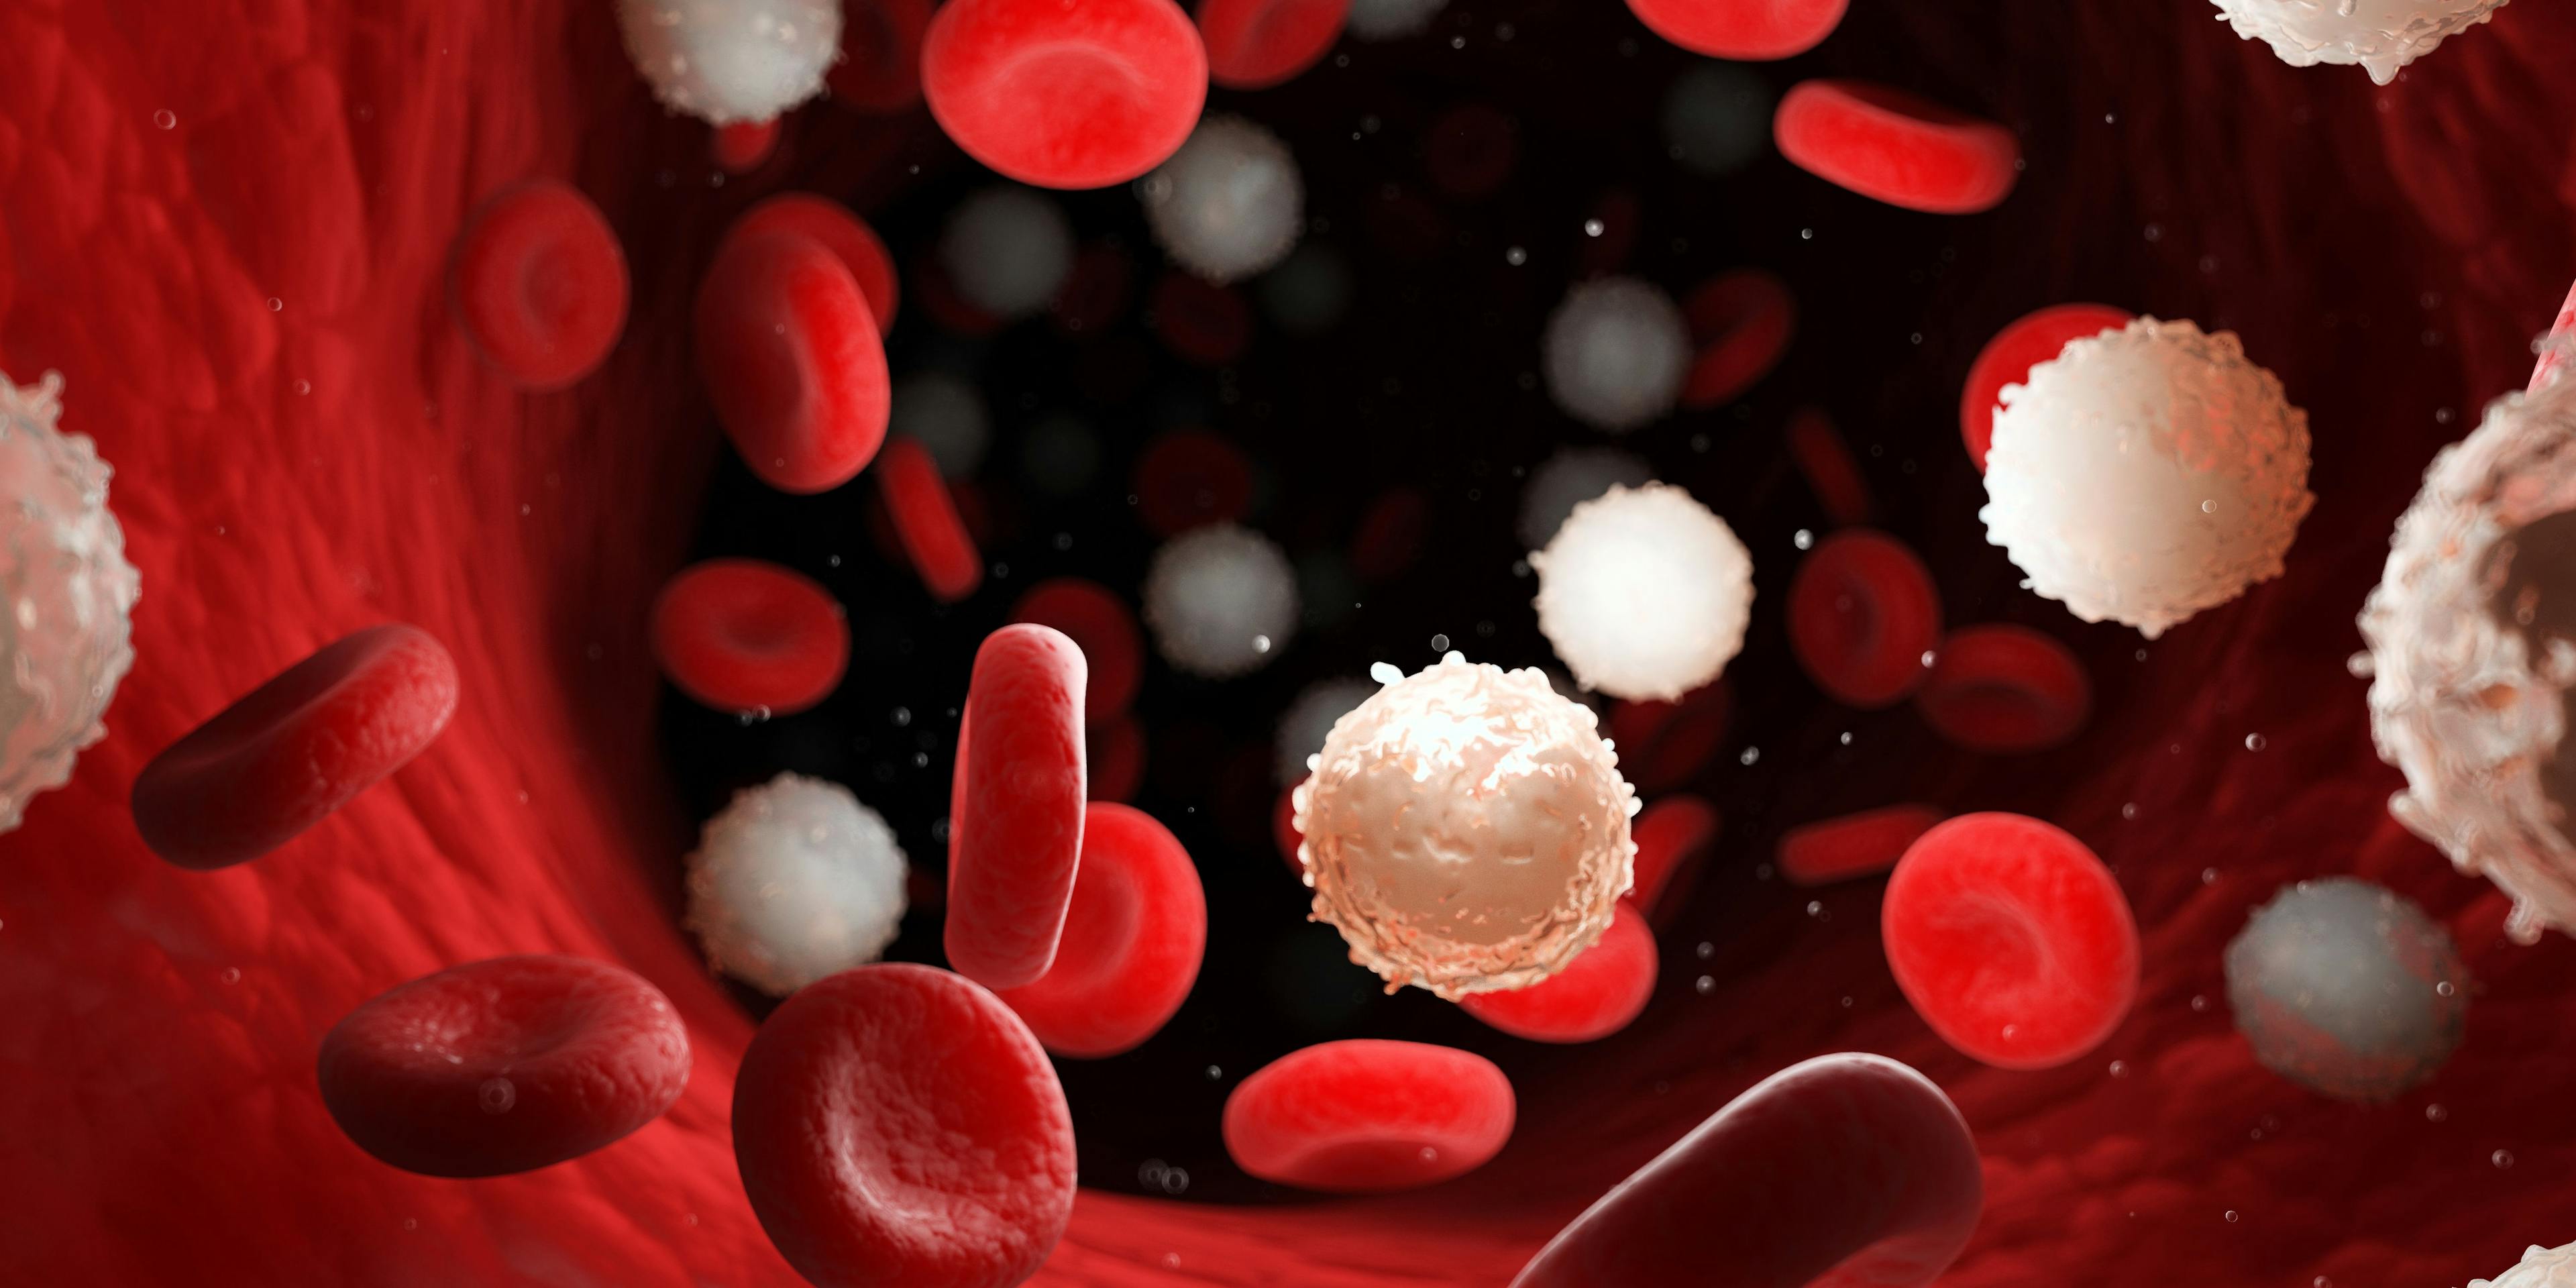 3D rendered medically accurate illustration of leukemia: ©SciePro - stock.adobe.com